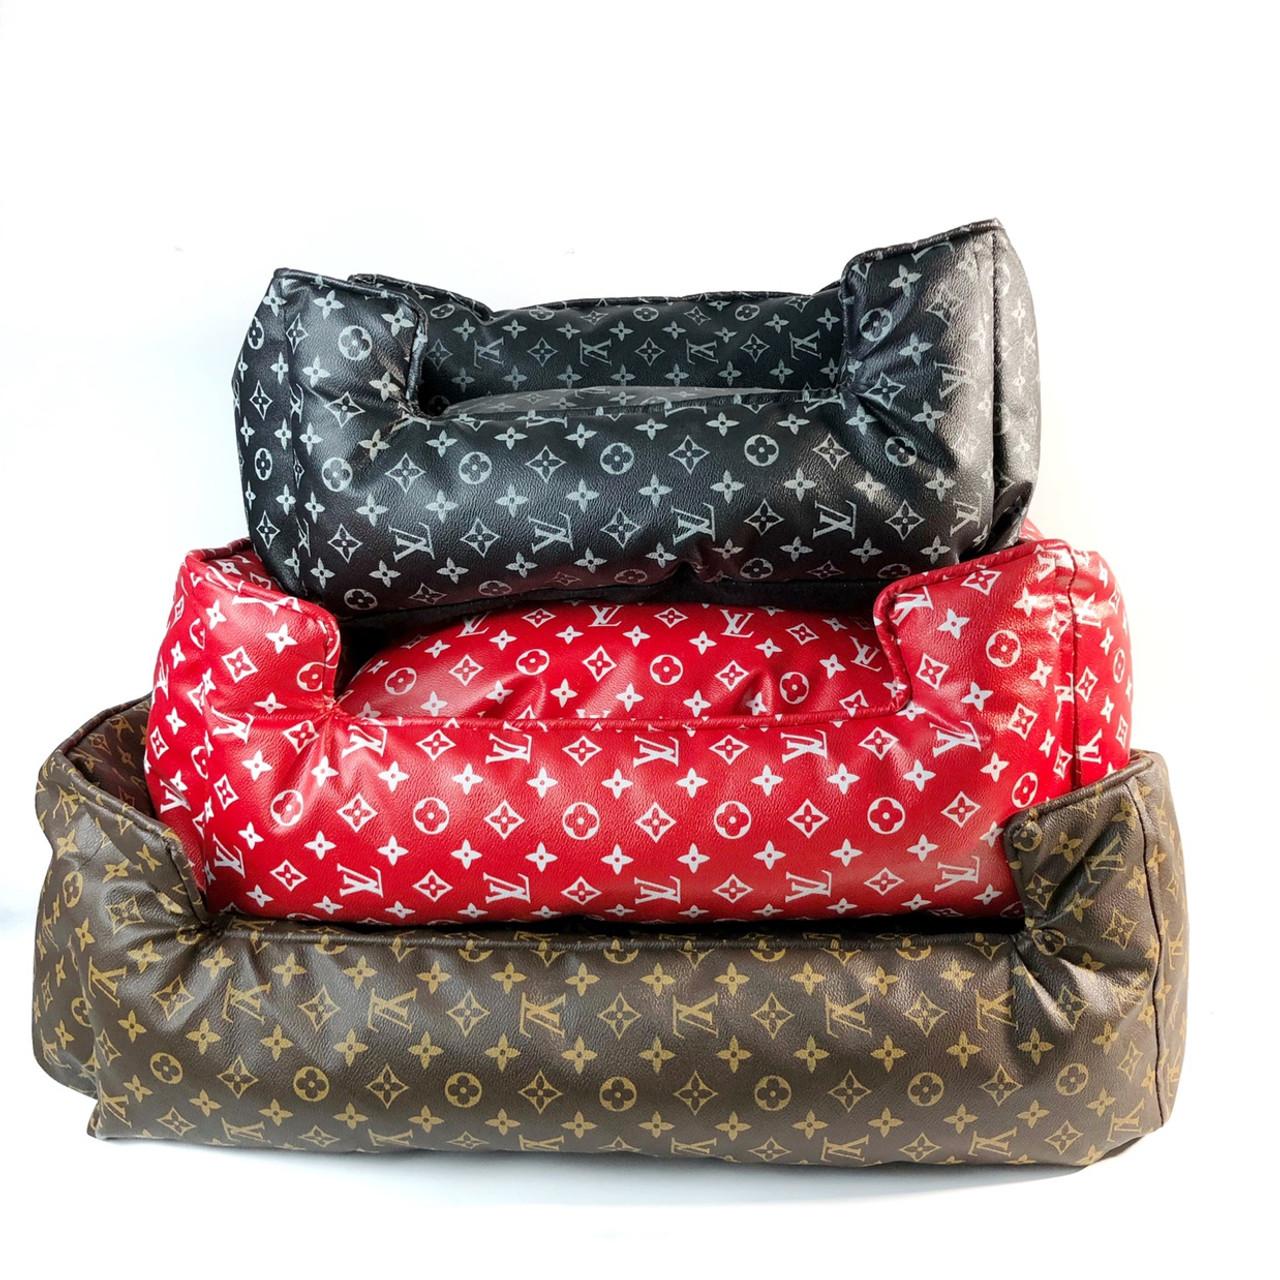 Flash SALE Louis Vuitton inspired dog bed.brown faux